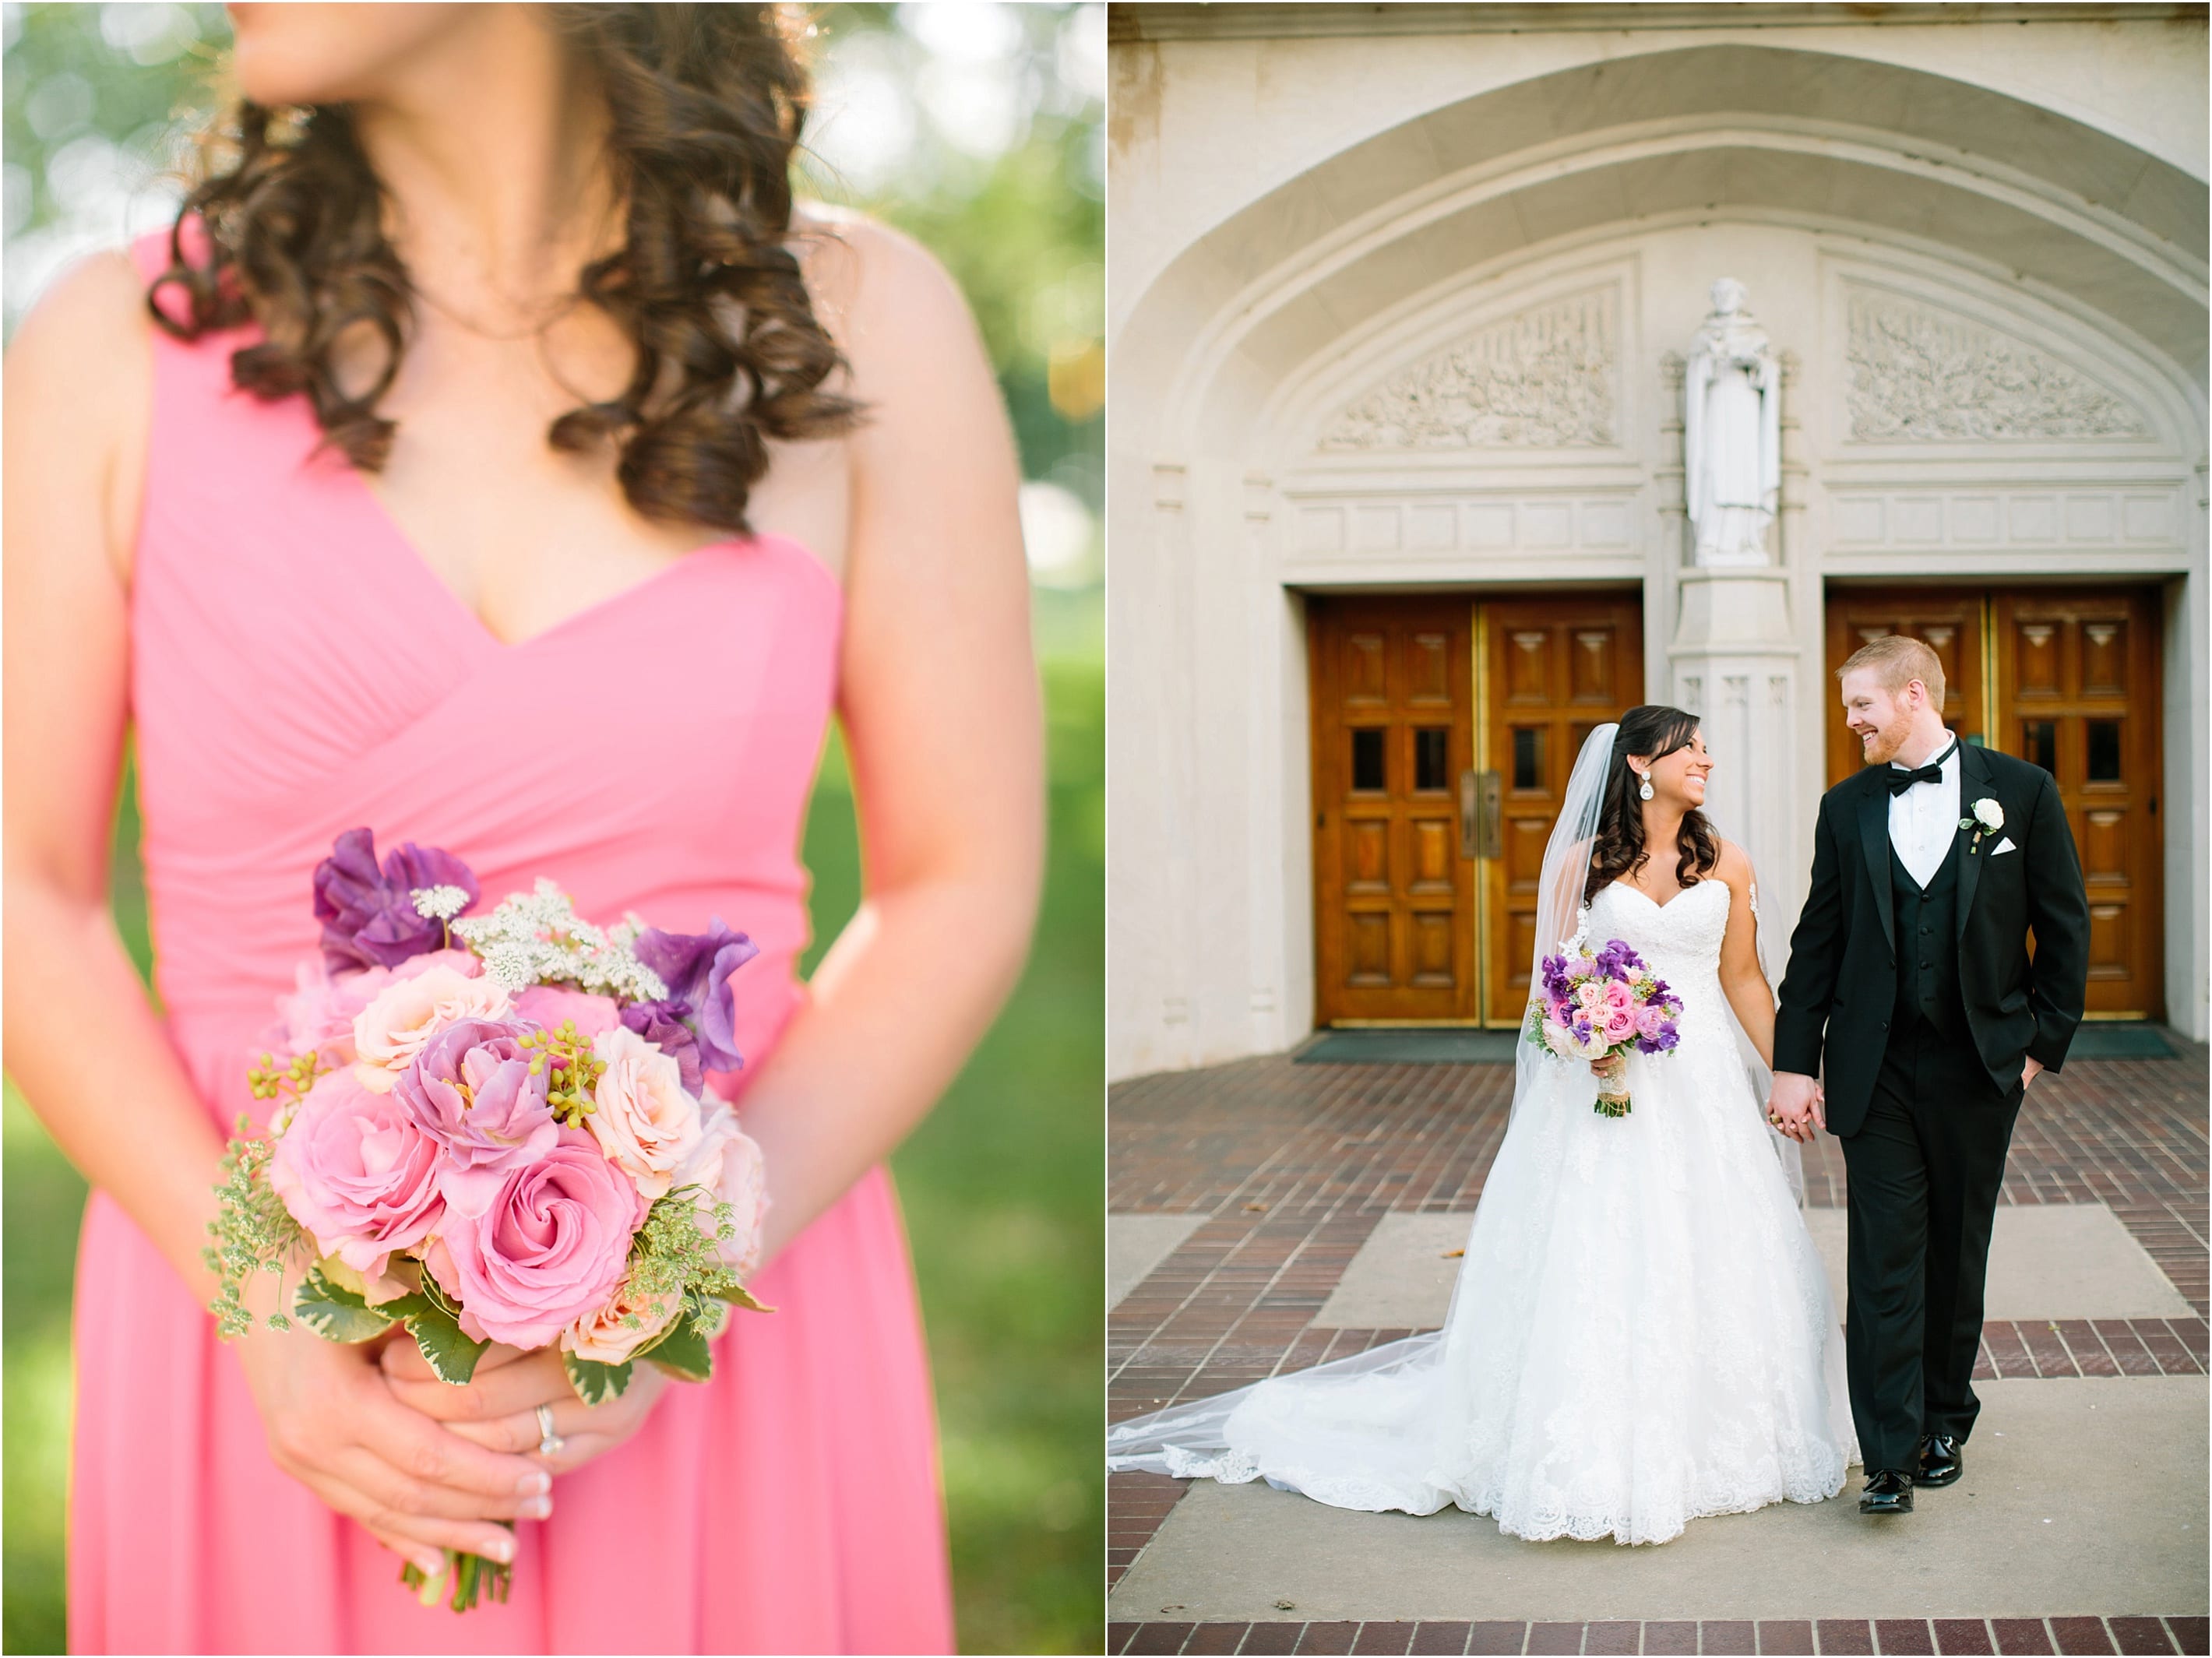 View More: http://tuckerimages.pass.us/moserwedding